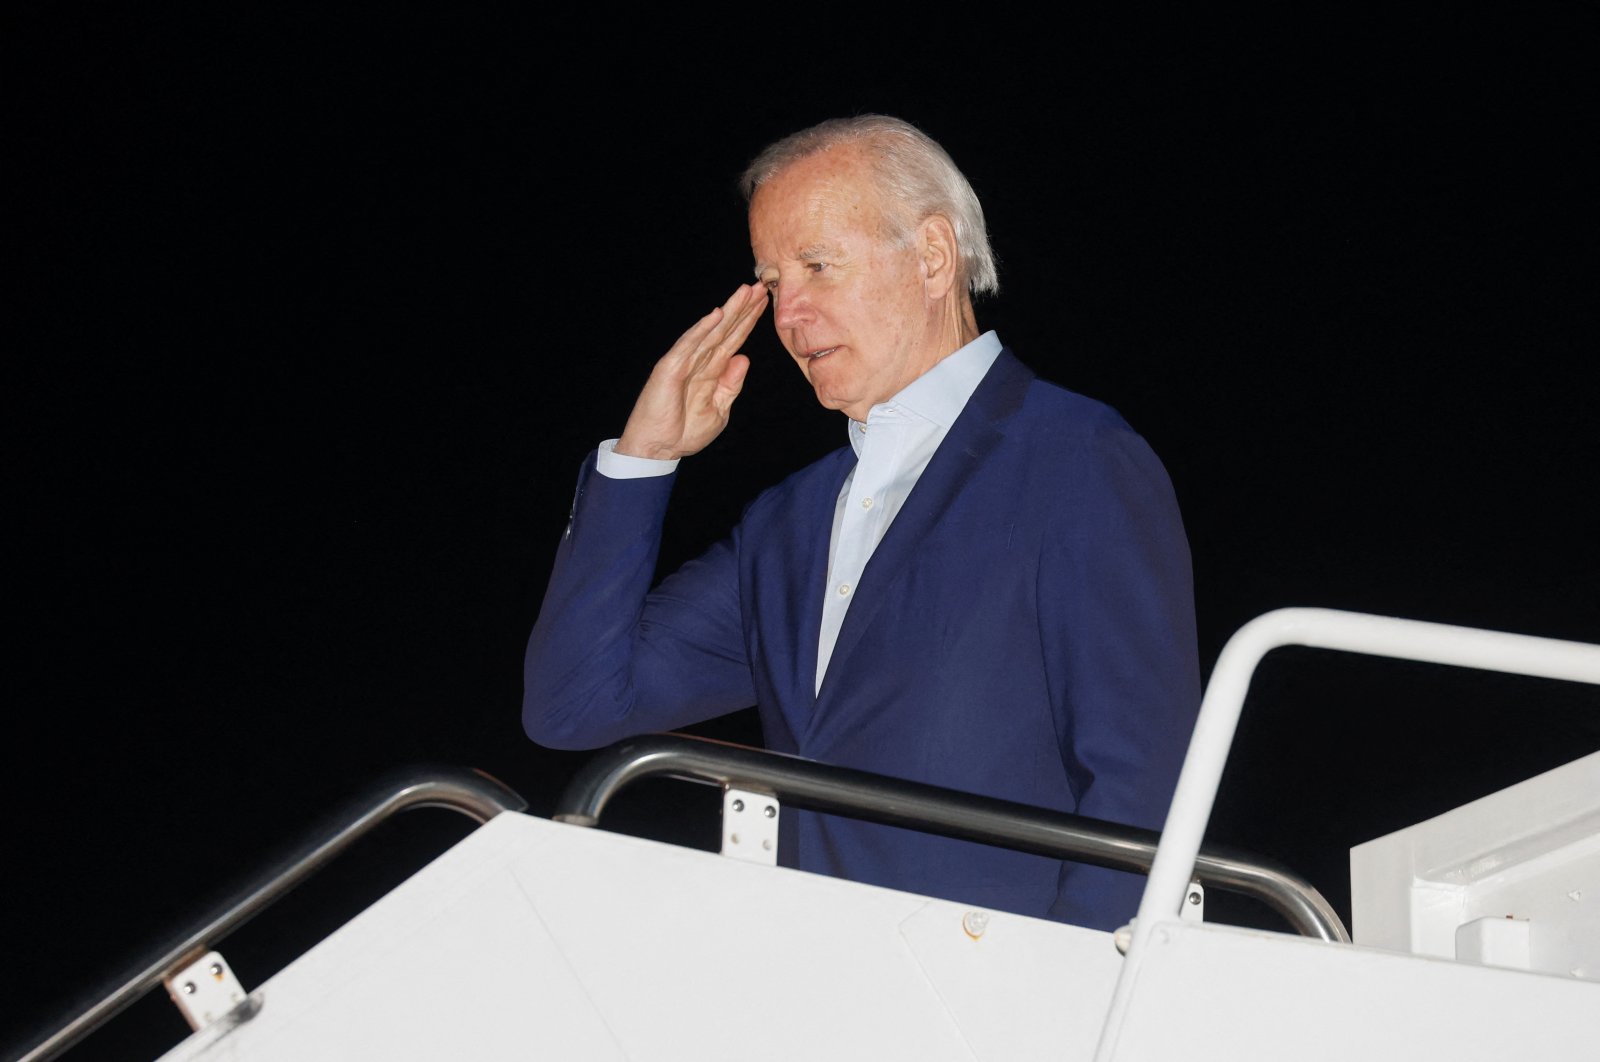 U.S. President Joe Biden salutes as he boards Air Force One for holiday vacation travel to St. Croix, U.S. Virgin Islands, from Joint Base Andrews, Maryland, U.S., Dec. 27, 2022. (Reuters Photo)